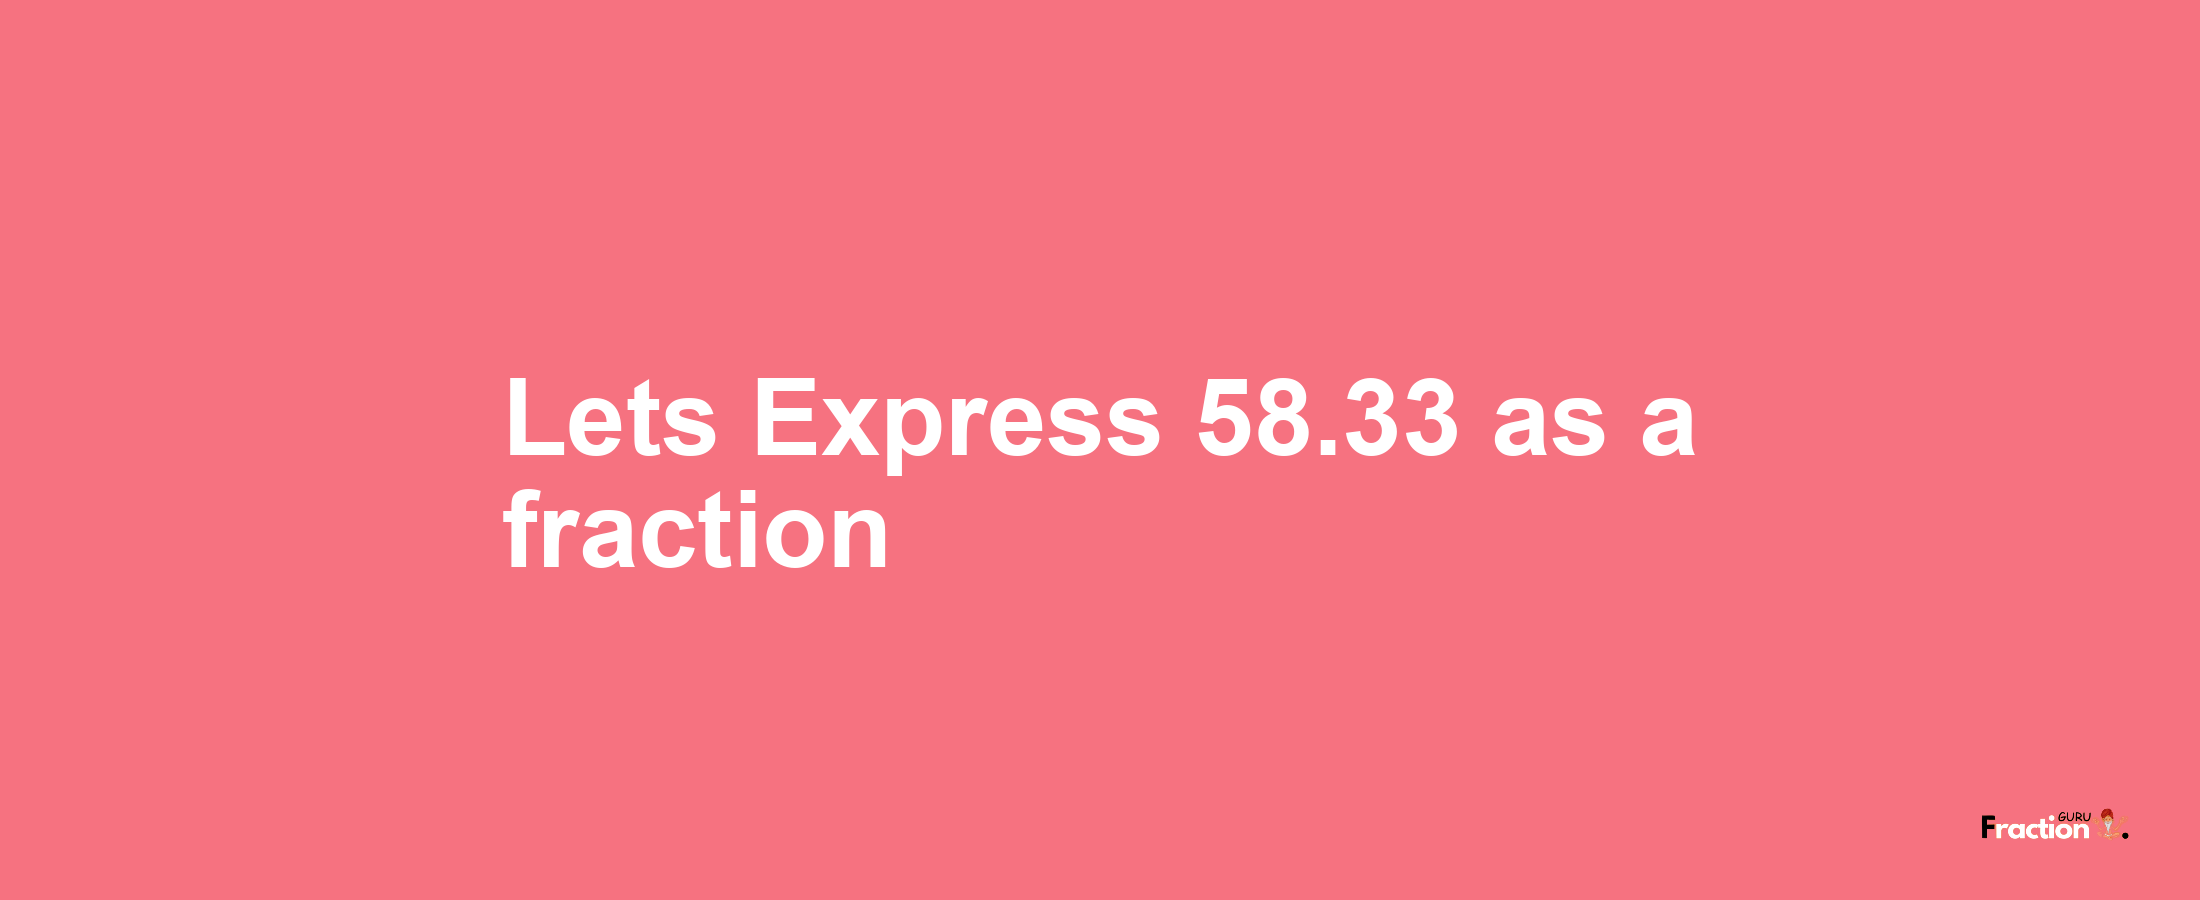 Lets Express 58.33 as afraction